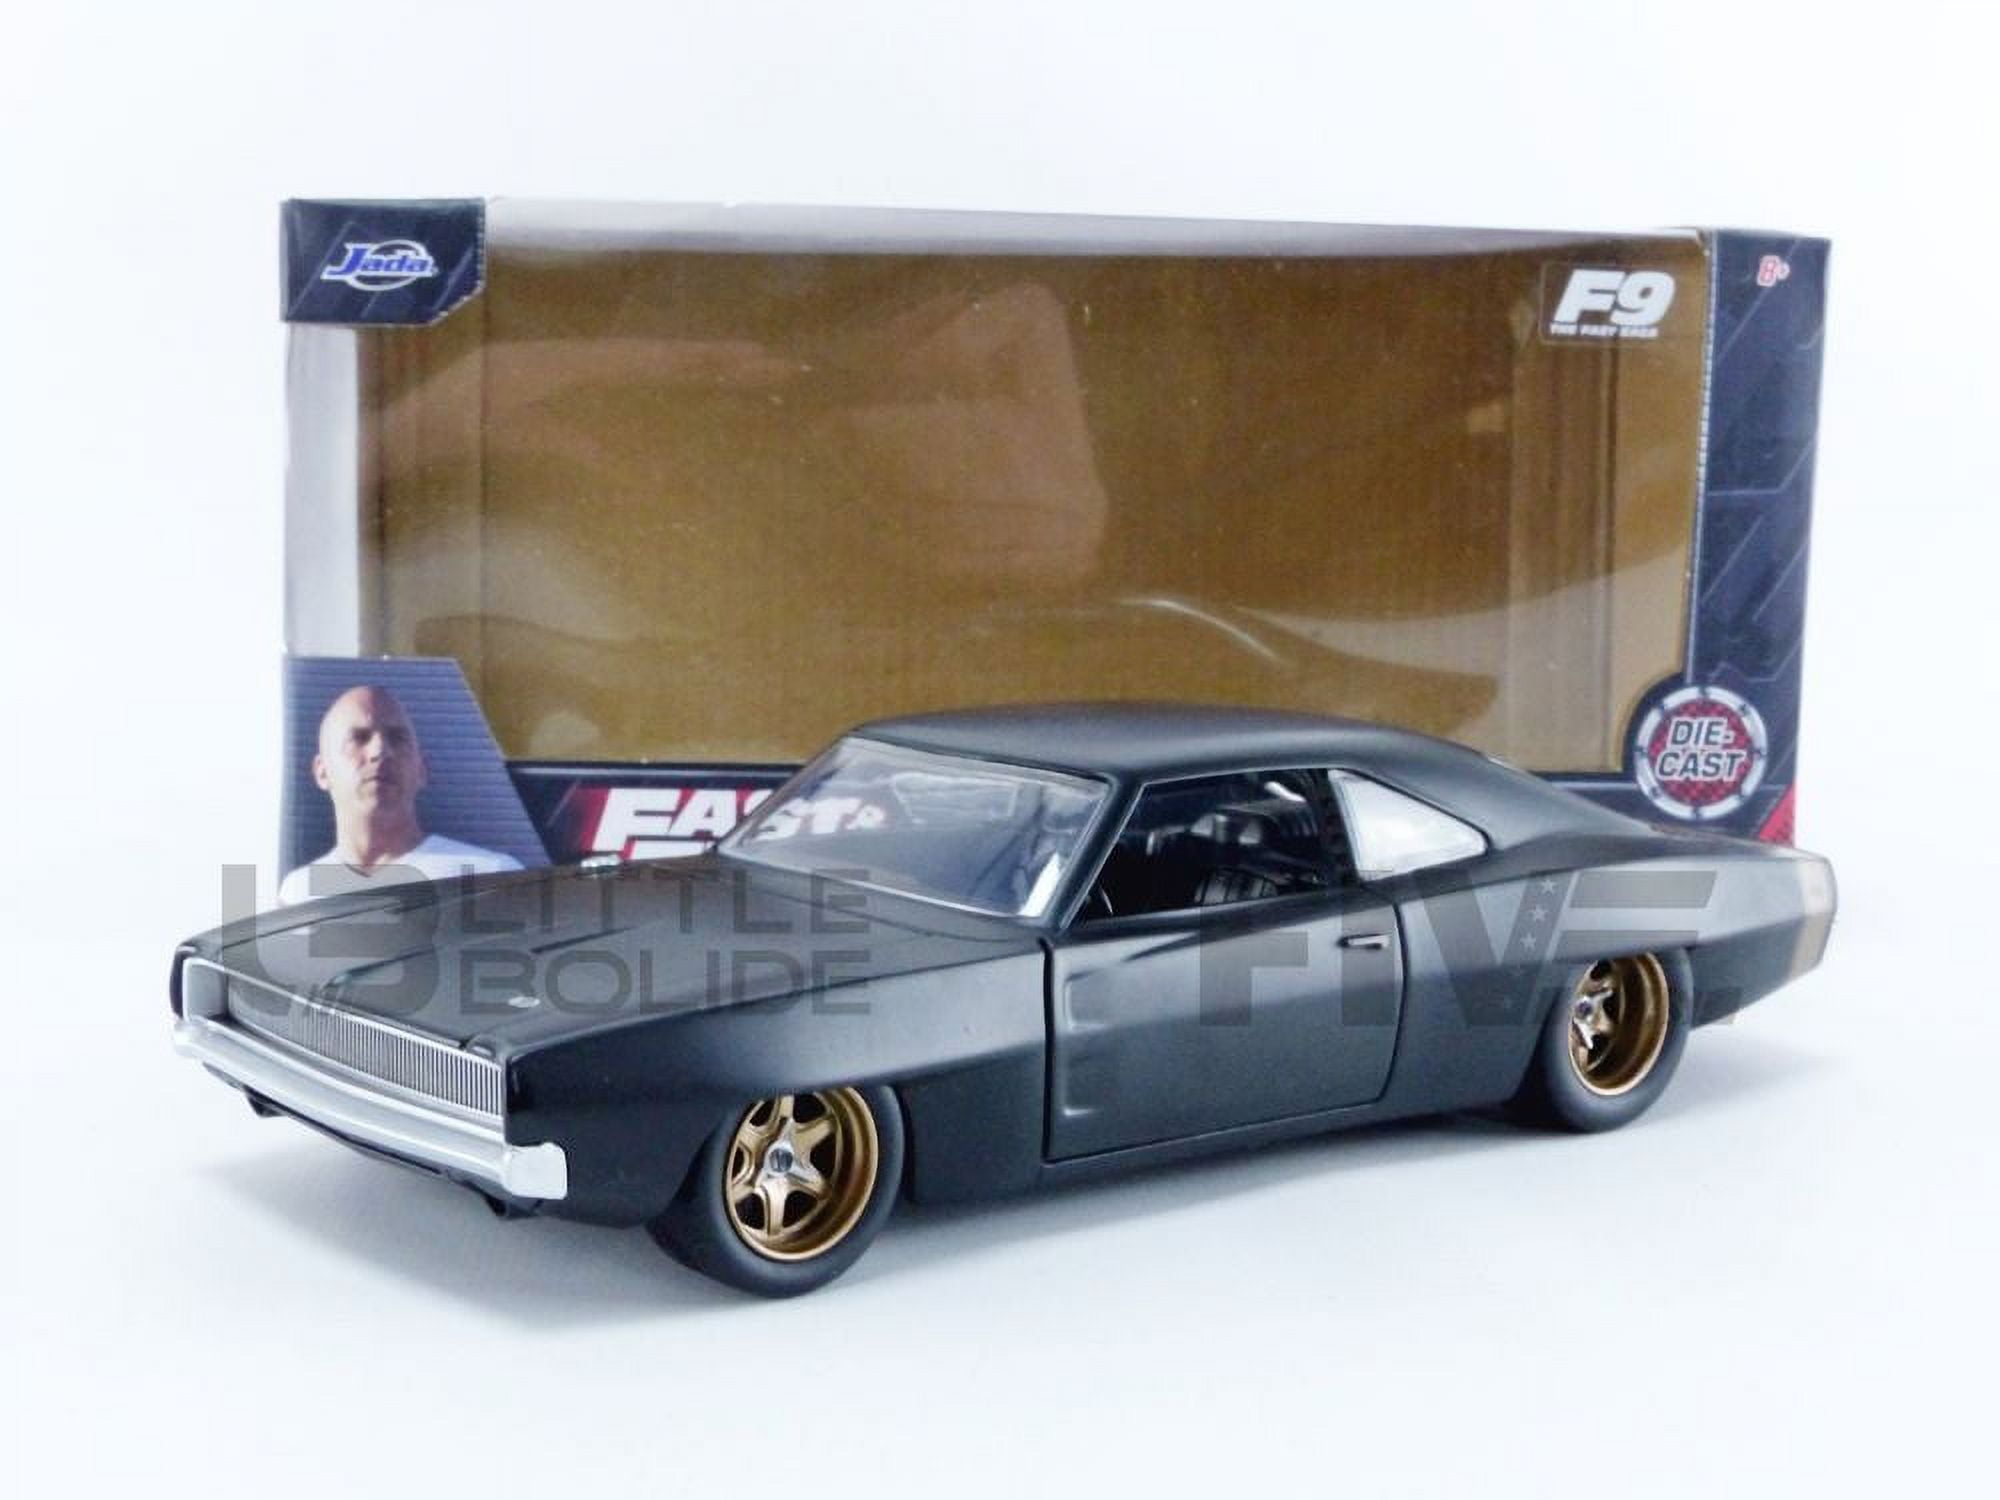 Picture of Jada 32614 1-24 Diecast Model Car for Doms 1968 Dodge Charger Widebody Matt Black Fast & Furious 9 F9 2021 Movie